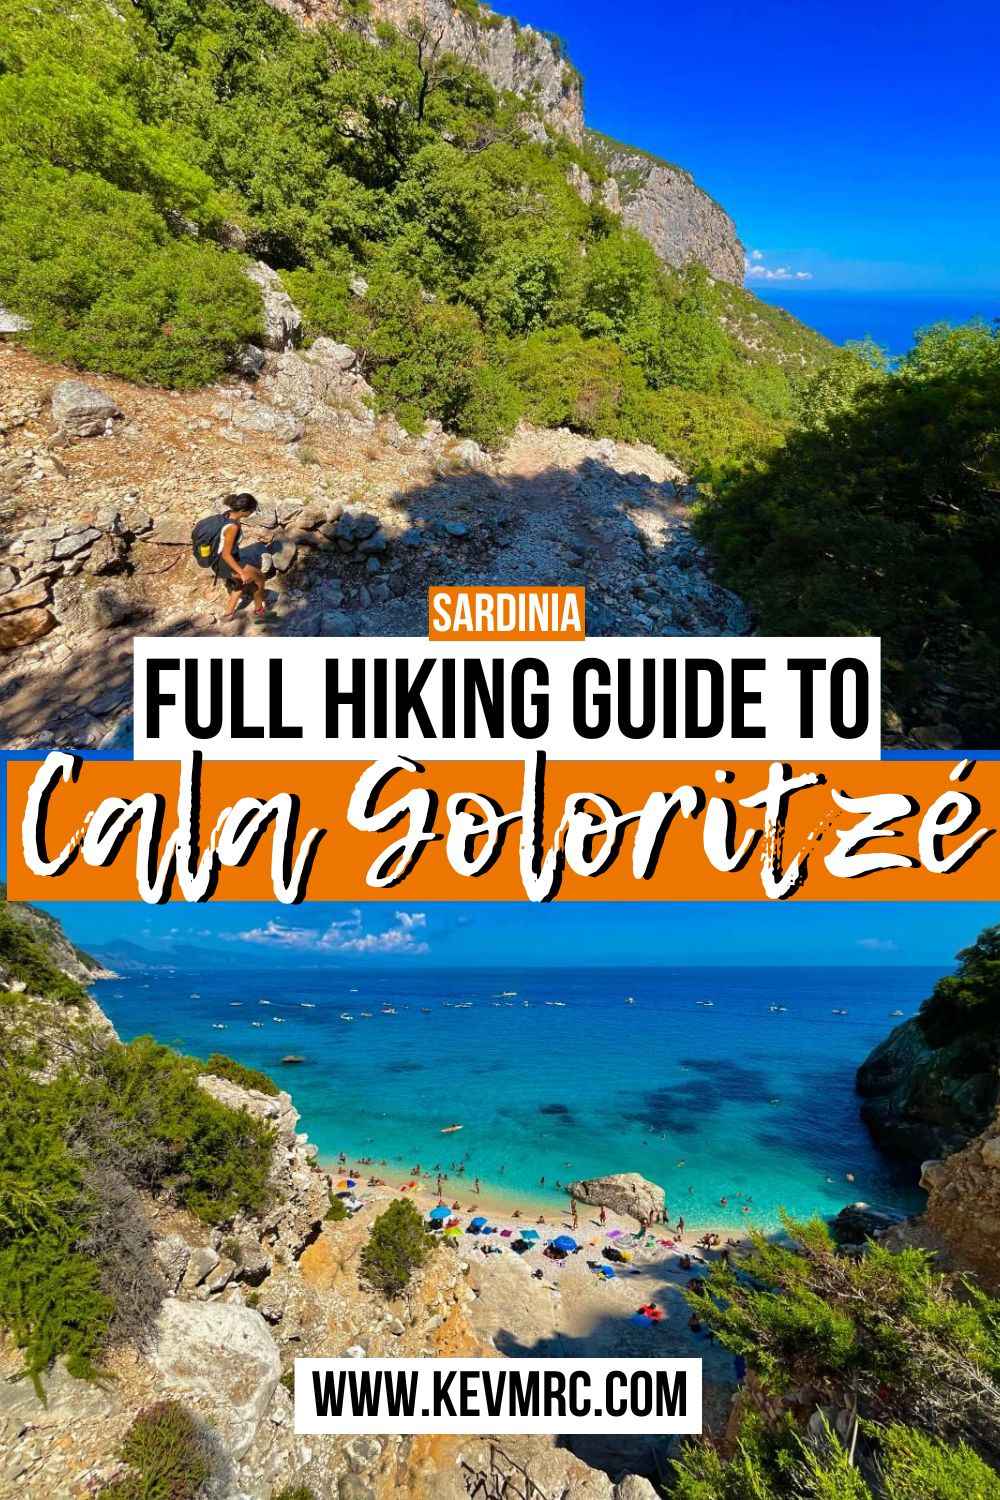 Find all the information you need to hike to the wonderful UNESCO site of Cala Goloritzé in Sardinia, Italy. cala goloritze sardinia | sardinia italy beaches | hiking sardinia | best sardinia hikes #sardinia #calagoloritze #sardiniahikes